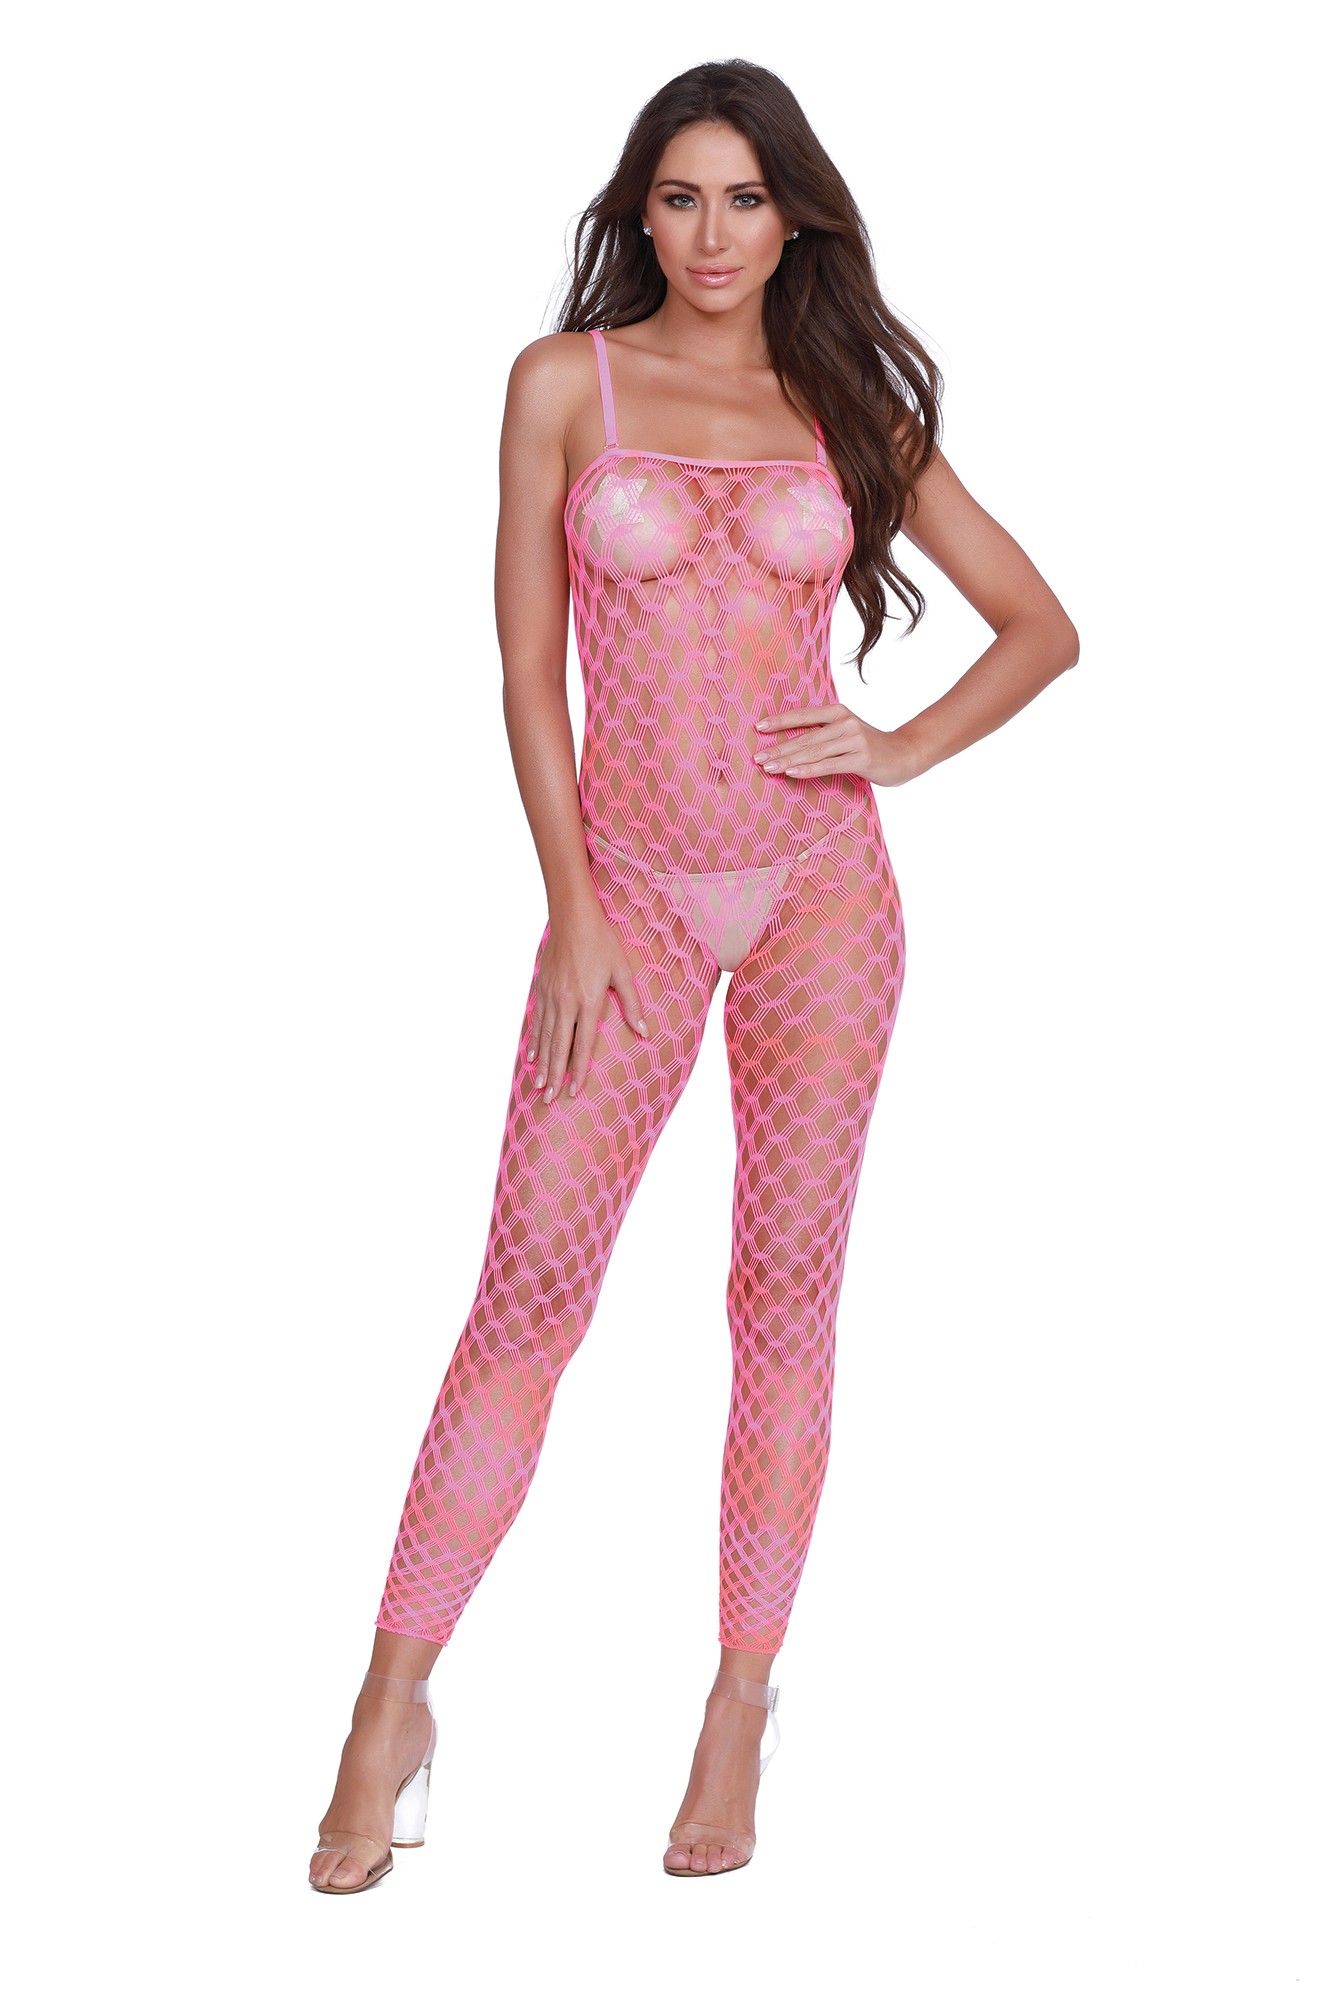 AIS Dreamgirl Convertible Rainbow multi-colored bodystocking that doubles as a crop top. 